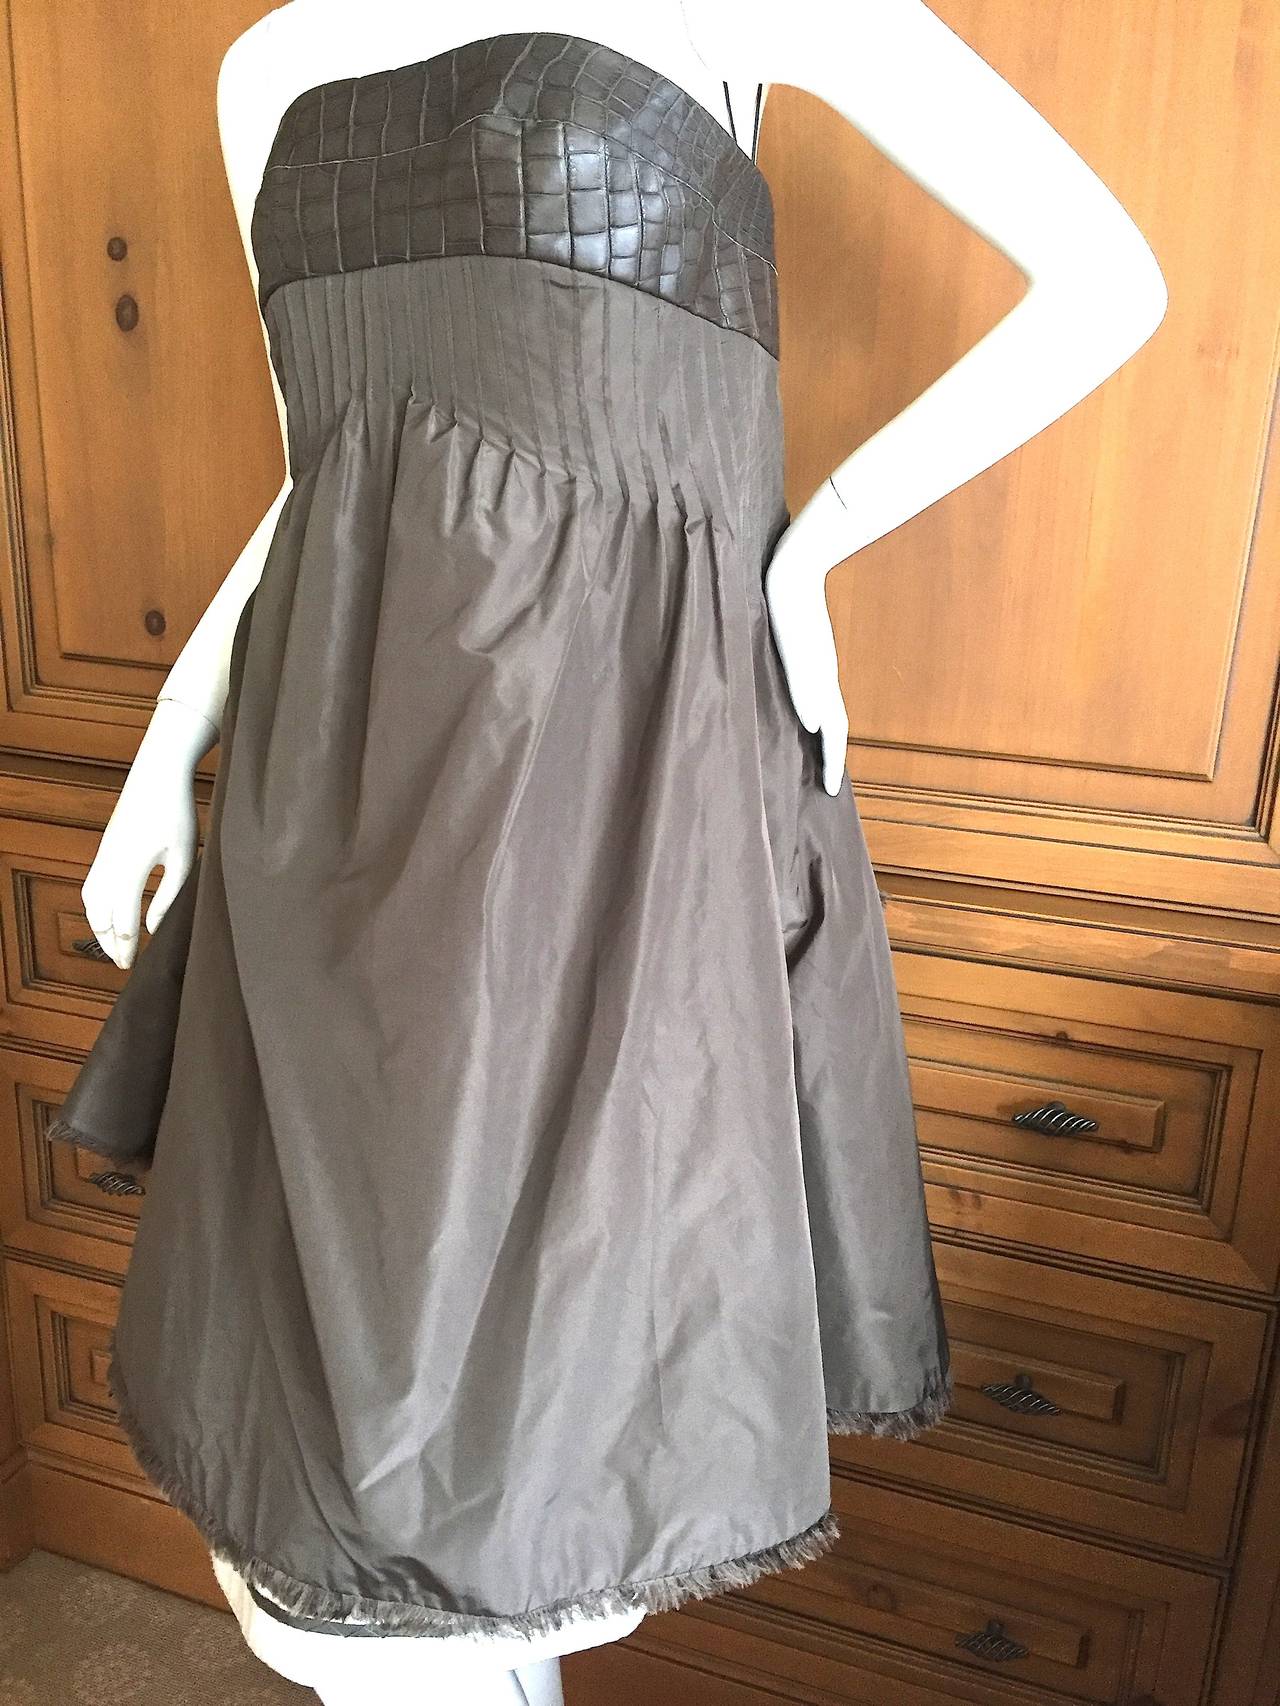 Magnificent olive green silk taffeta strapless cocktail dress with genuine alligator bust.
The details are exquisite including pin tucked pleating below bust.
More photos to follow;
Size Small
Bust 36